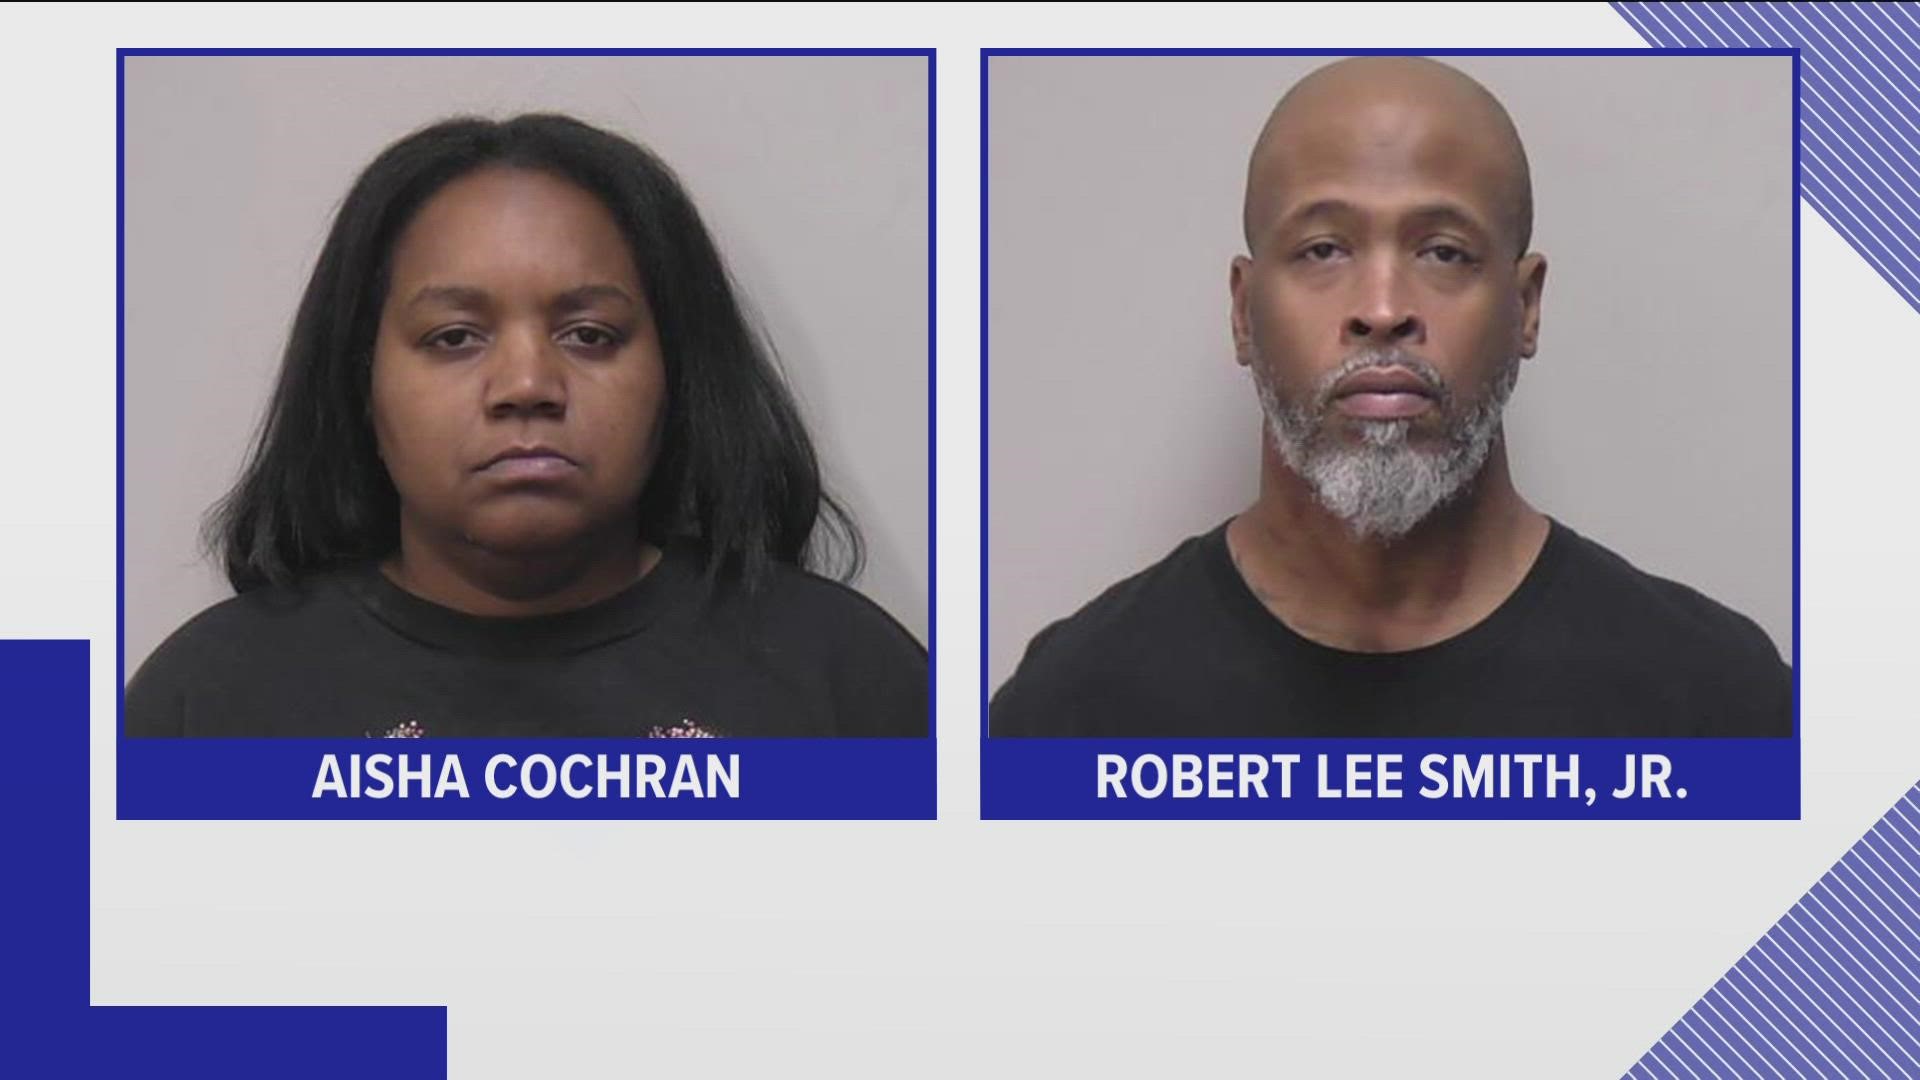 Robert Lee Smith, 48, and Aisha Cochran, 45, were stopped for a speed violation on I-75 in Hancock Co. on Jan. 11. OSHP said troopers seized 183 grams of fentanyl.